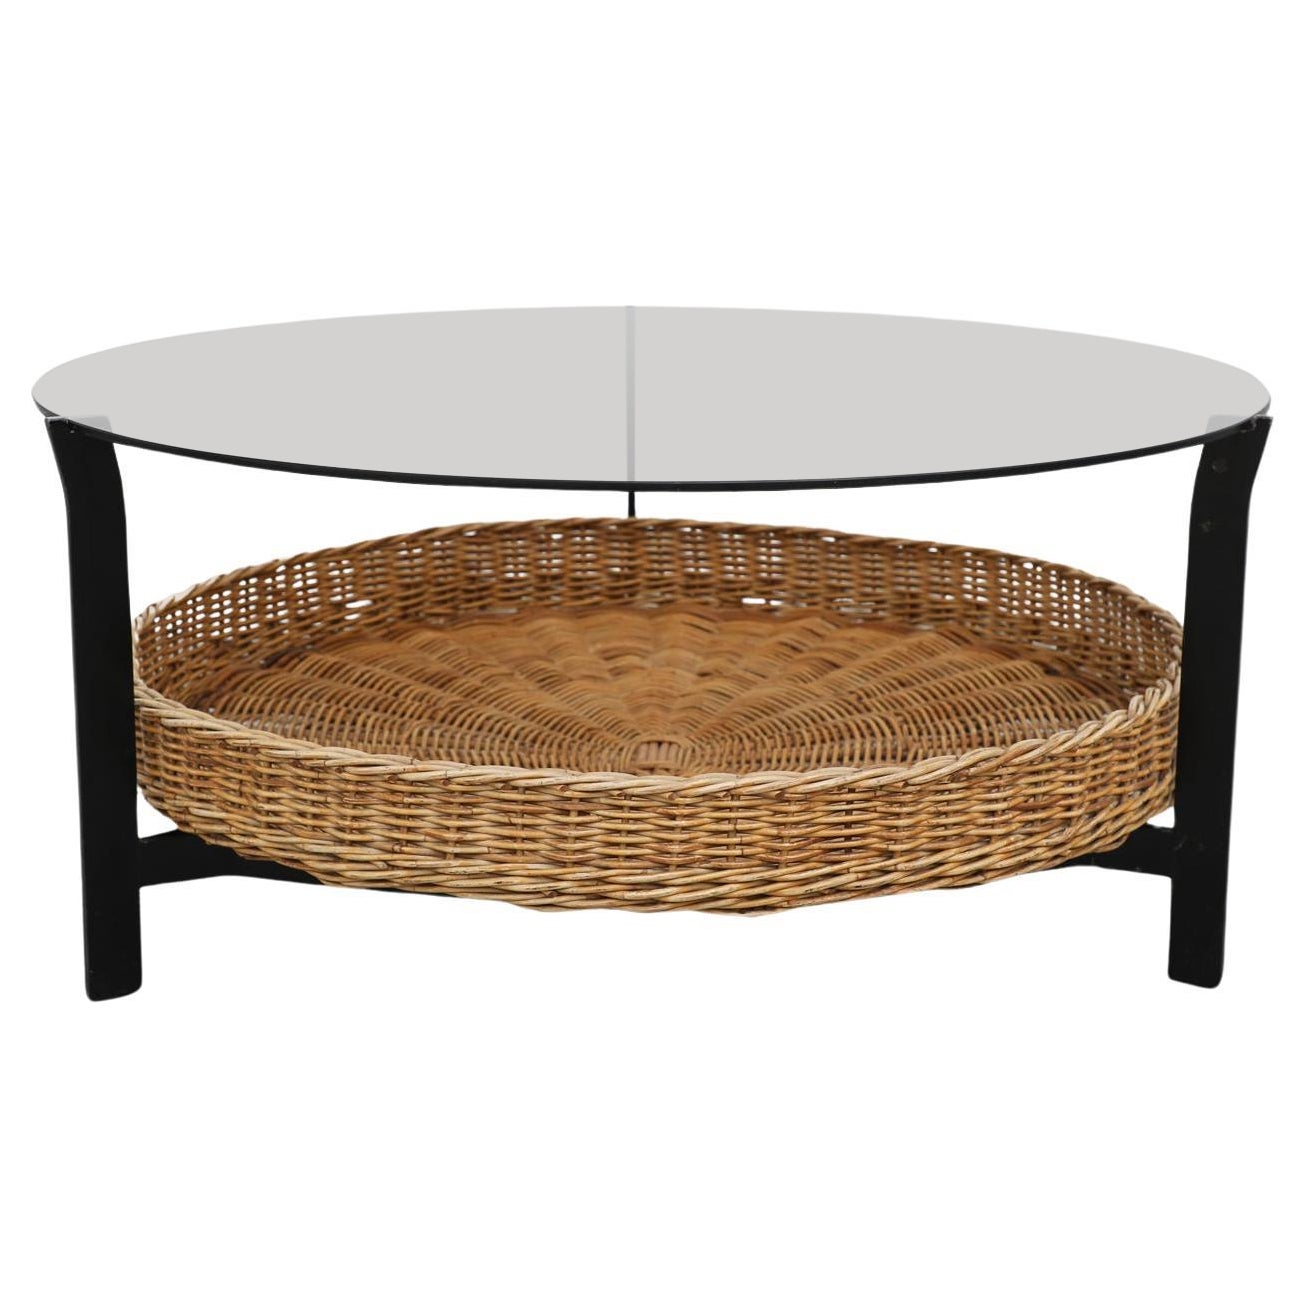 Mid-Century Round Modernist Coffee Table with Smoked Glass and Rattan Basket